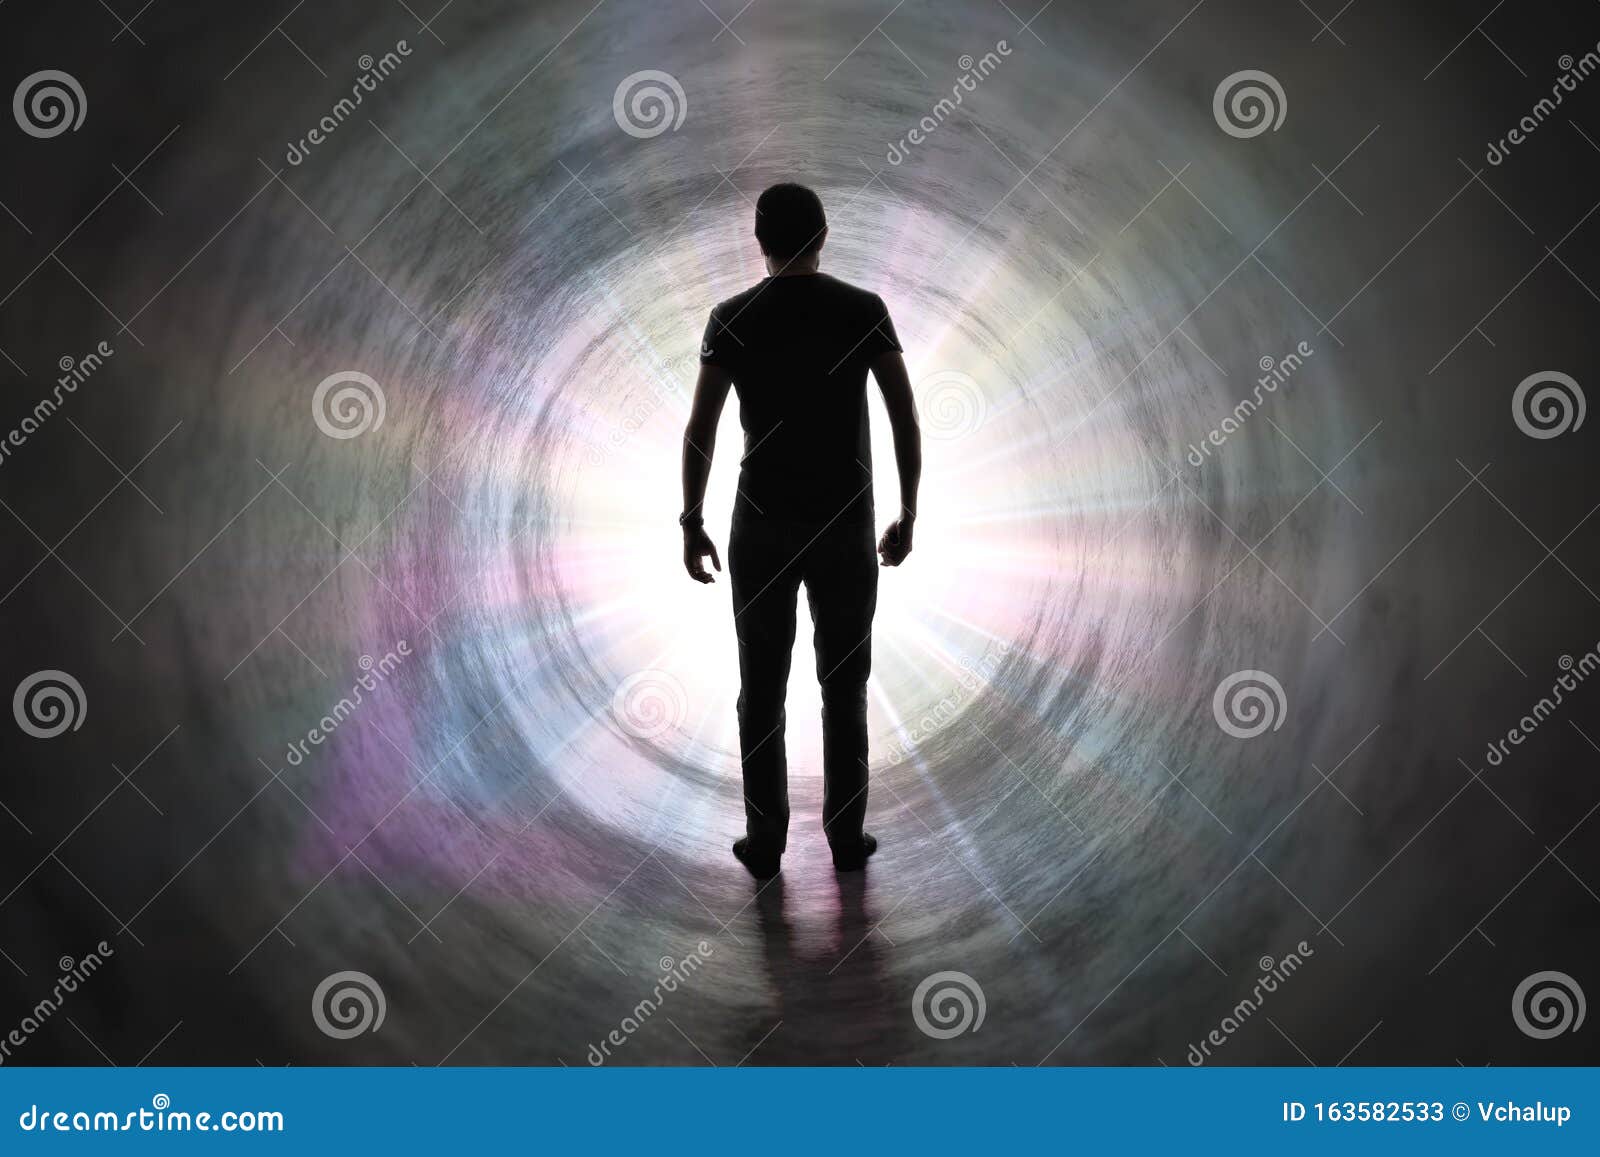 life after death concept. silhouette of man`s soul is walking to bright light - rays of god inside tunnel.